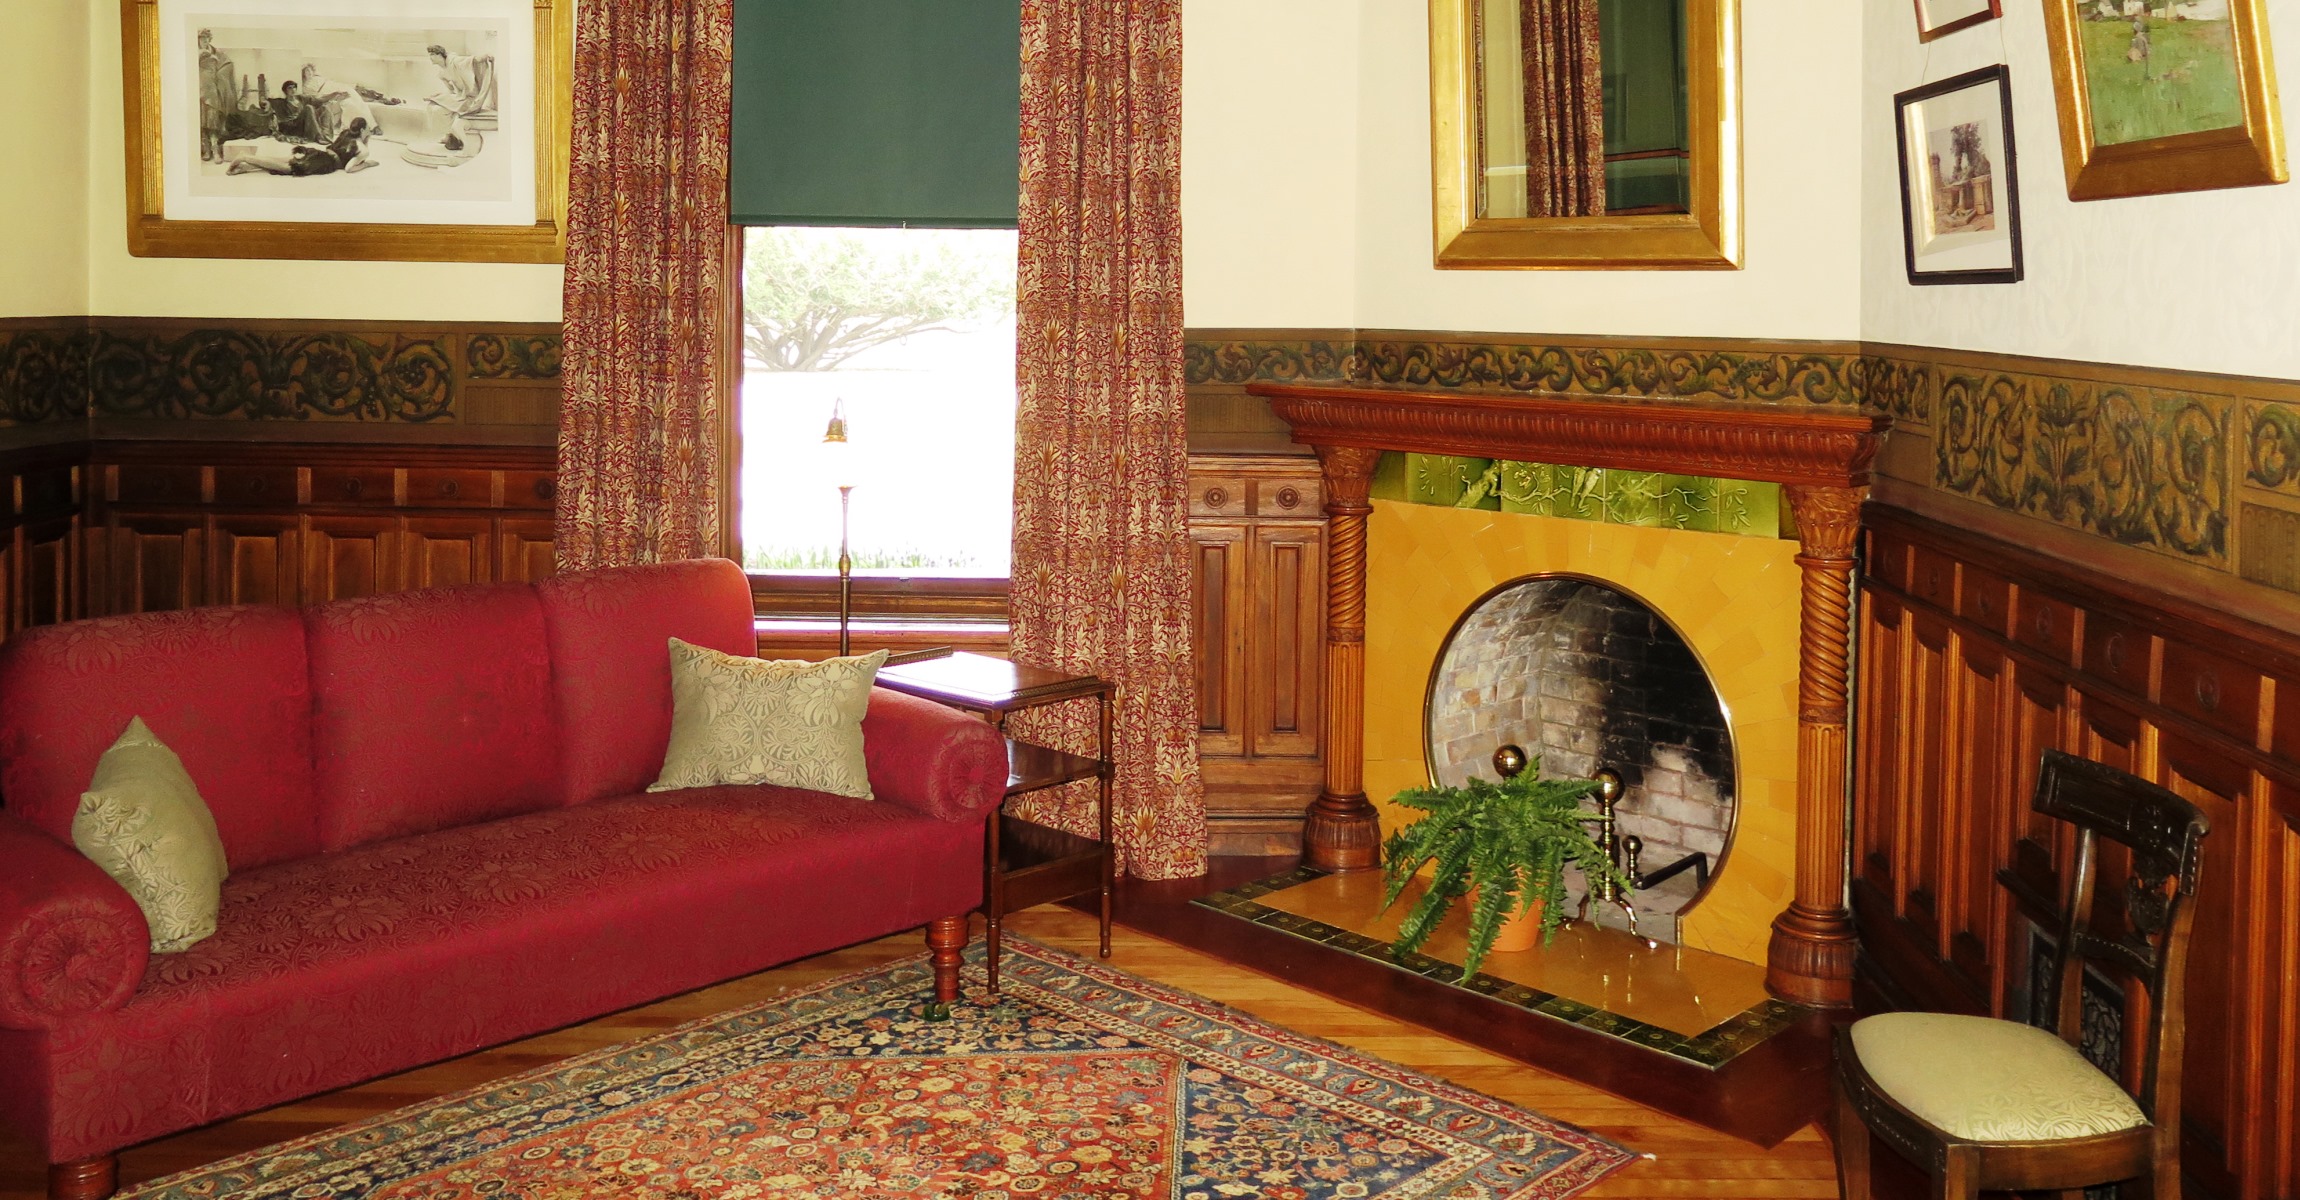 Room with a red sofa, patterned carpet and curtains, wood paneling, paintings on the wall, decorative paint border, and fireplace with round opening and green and yellow decorative tiles.